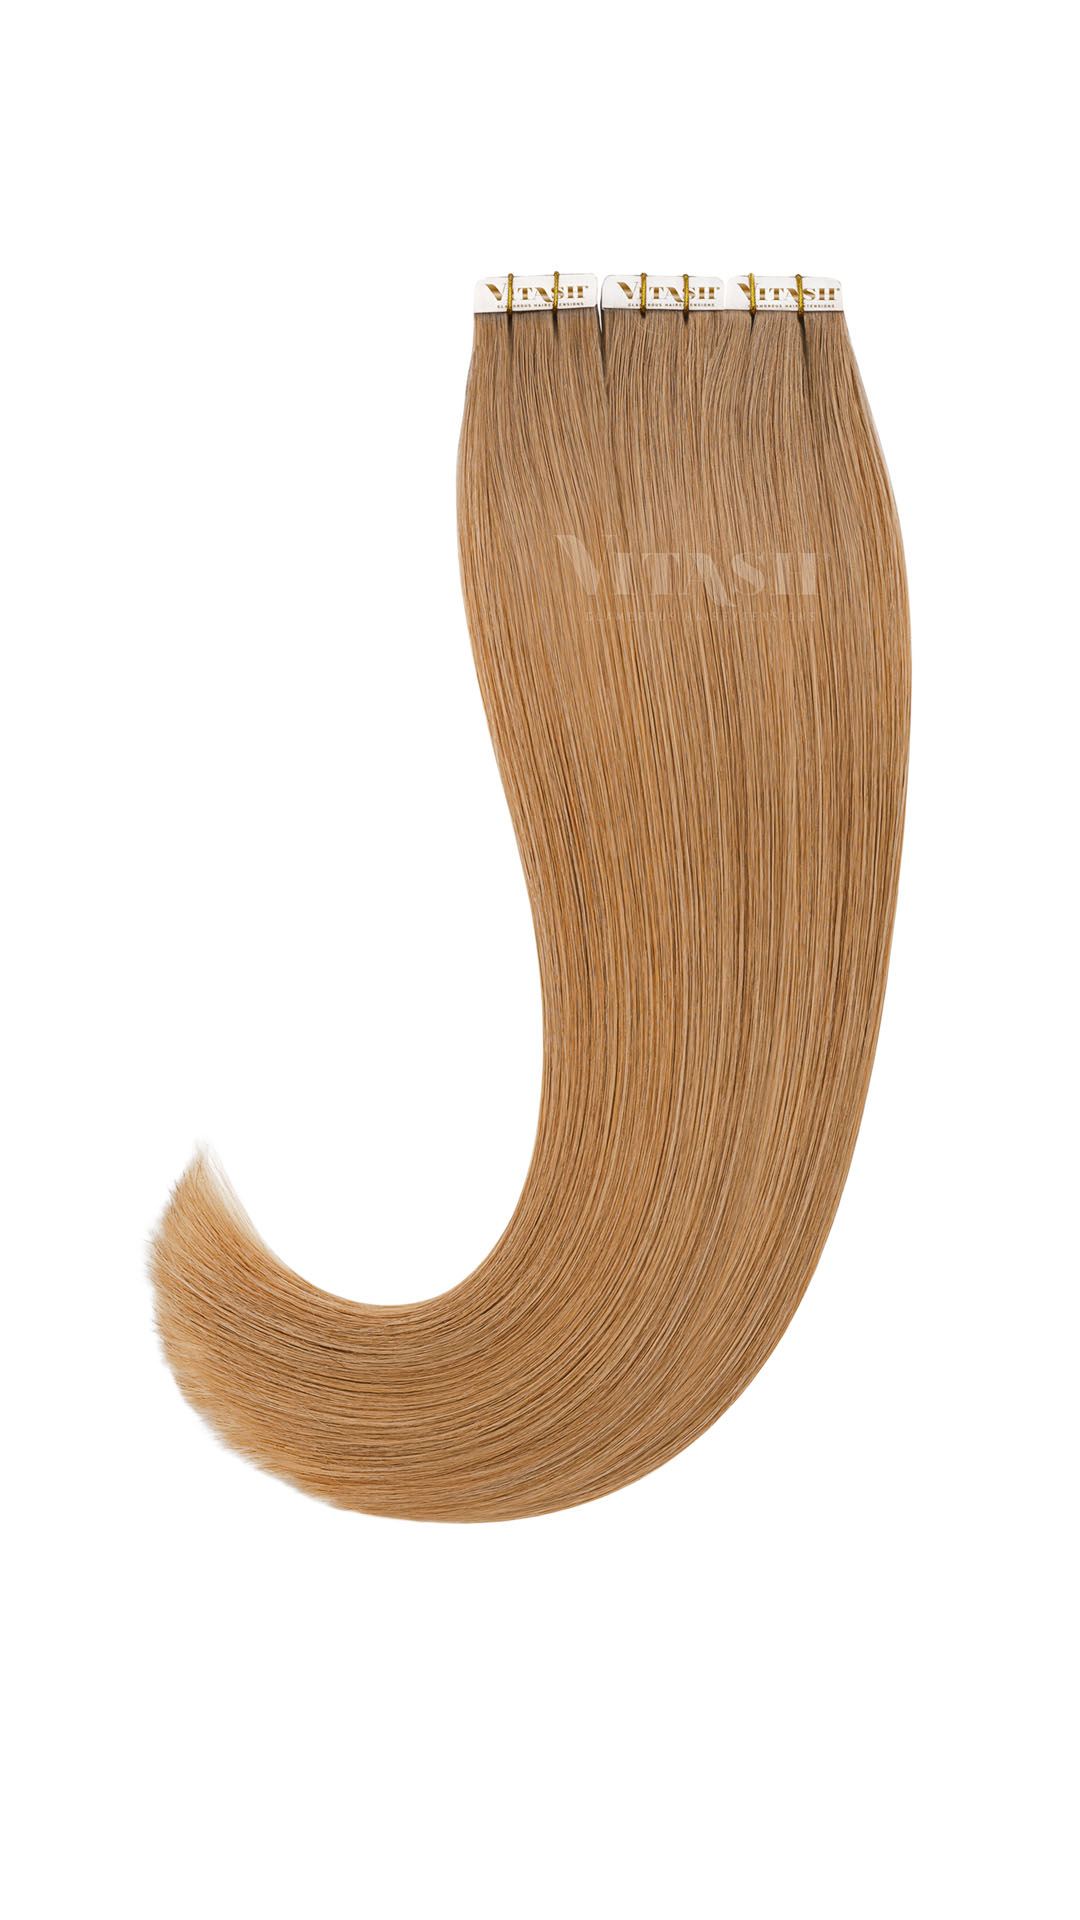 20 Remy Tape In Extensions Haarverlaengerung Farbe Dunkelgoldblond 50cm